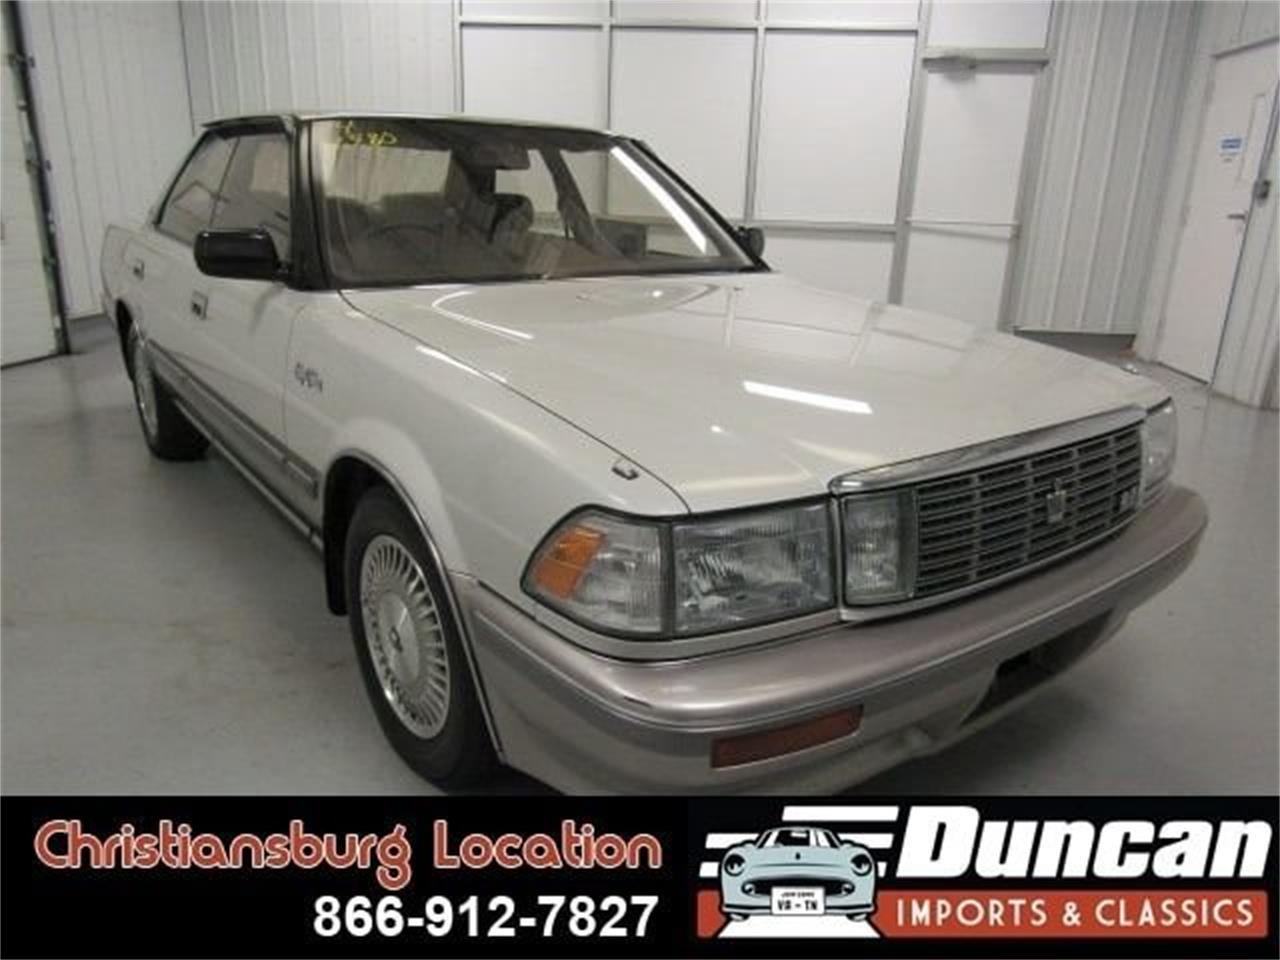 1991 Toyota Crown for sale in Christiansburg, VA